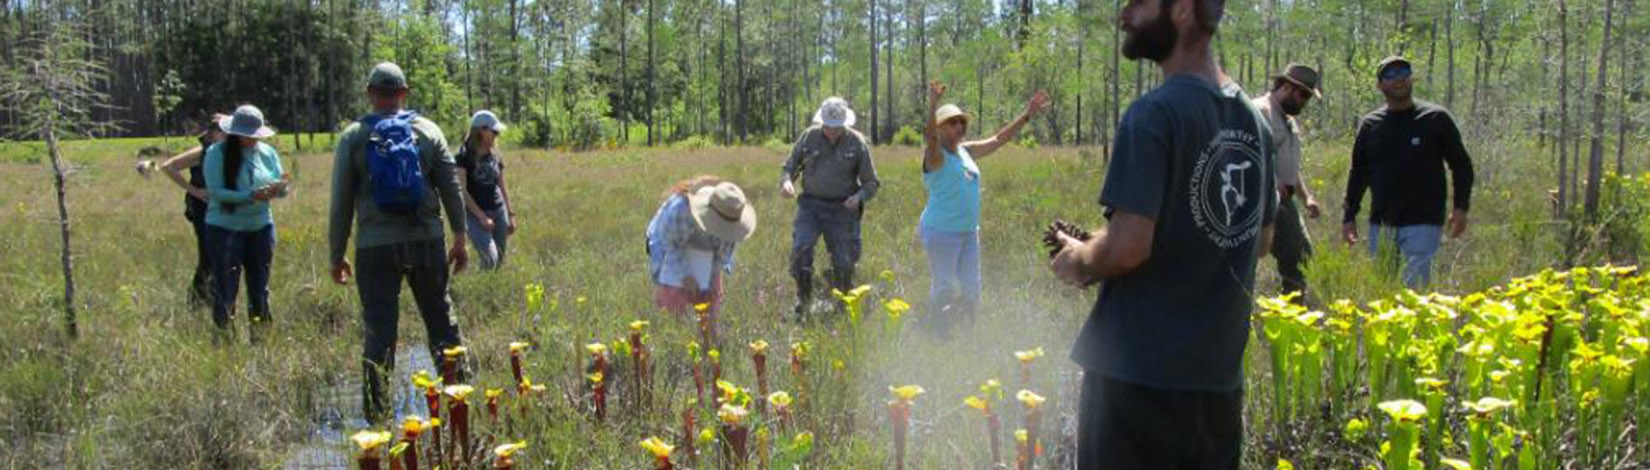 Photo of people in a natural setting looking at Pitcher Plants.